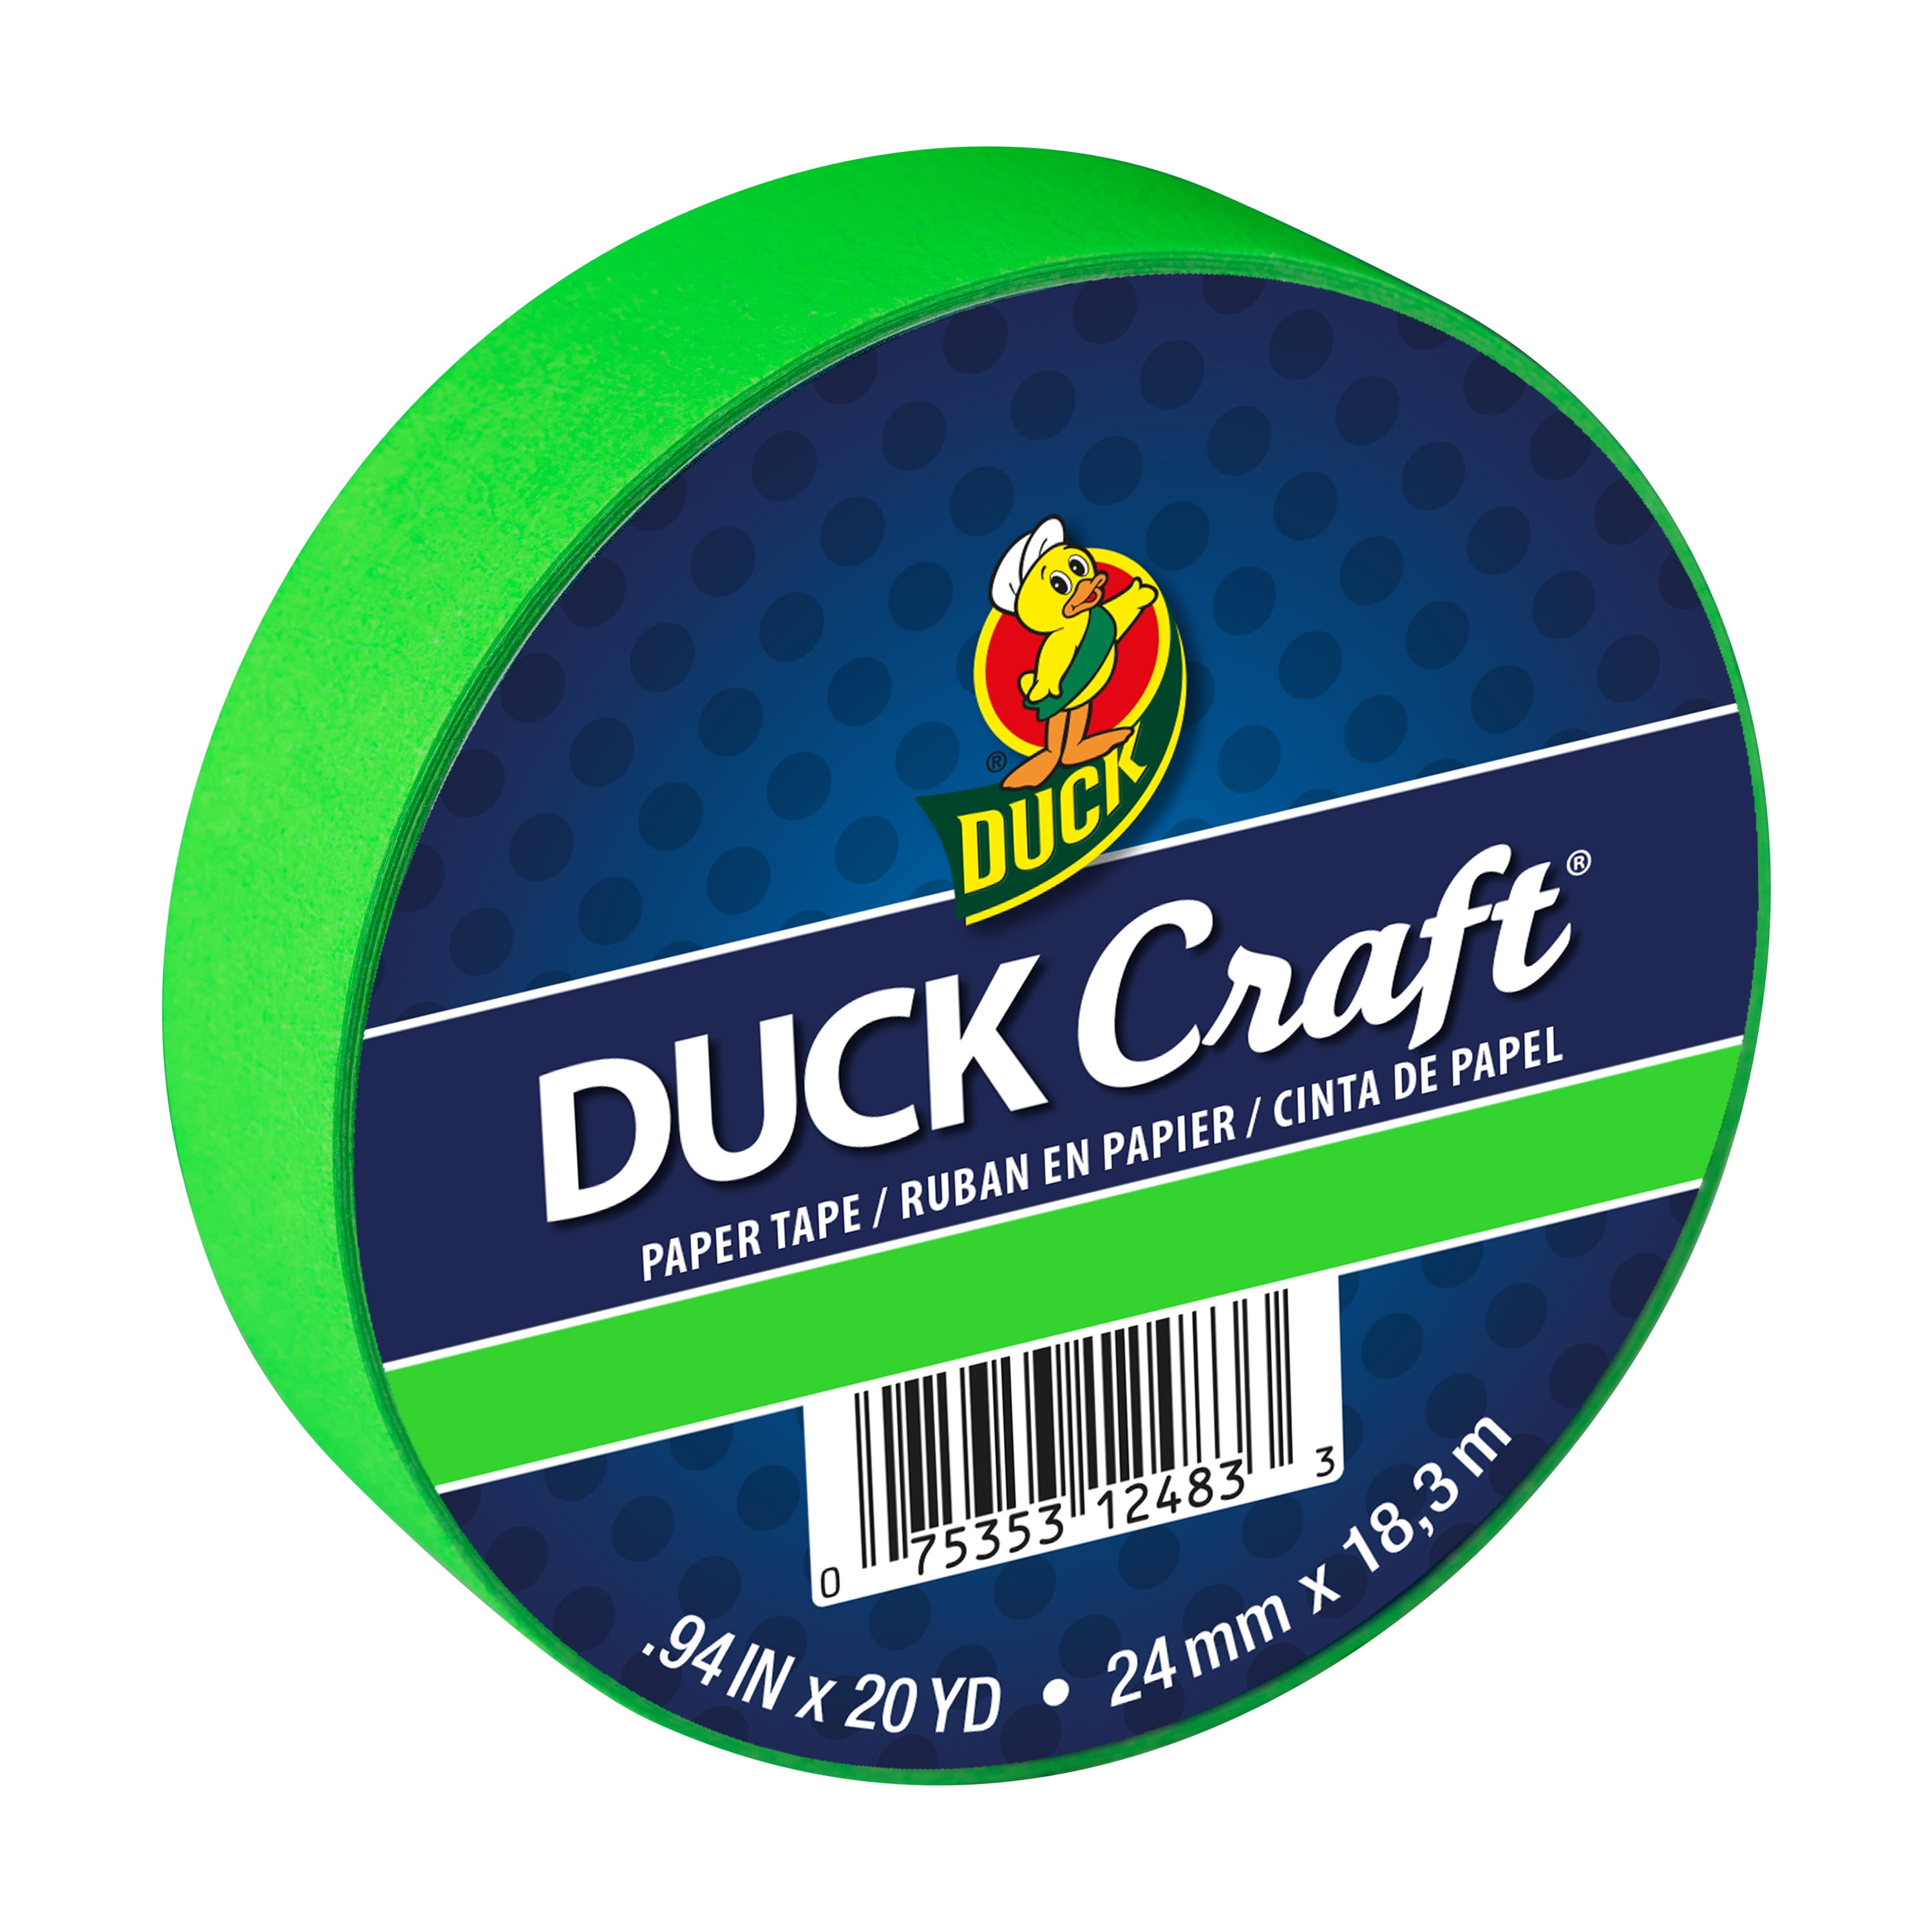 Duck Brand Duct Tape Markers - 3 PCS - Silver/Gold/White - New! Sealed  Package!